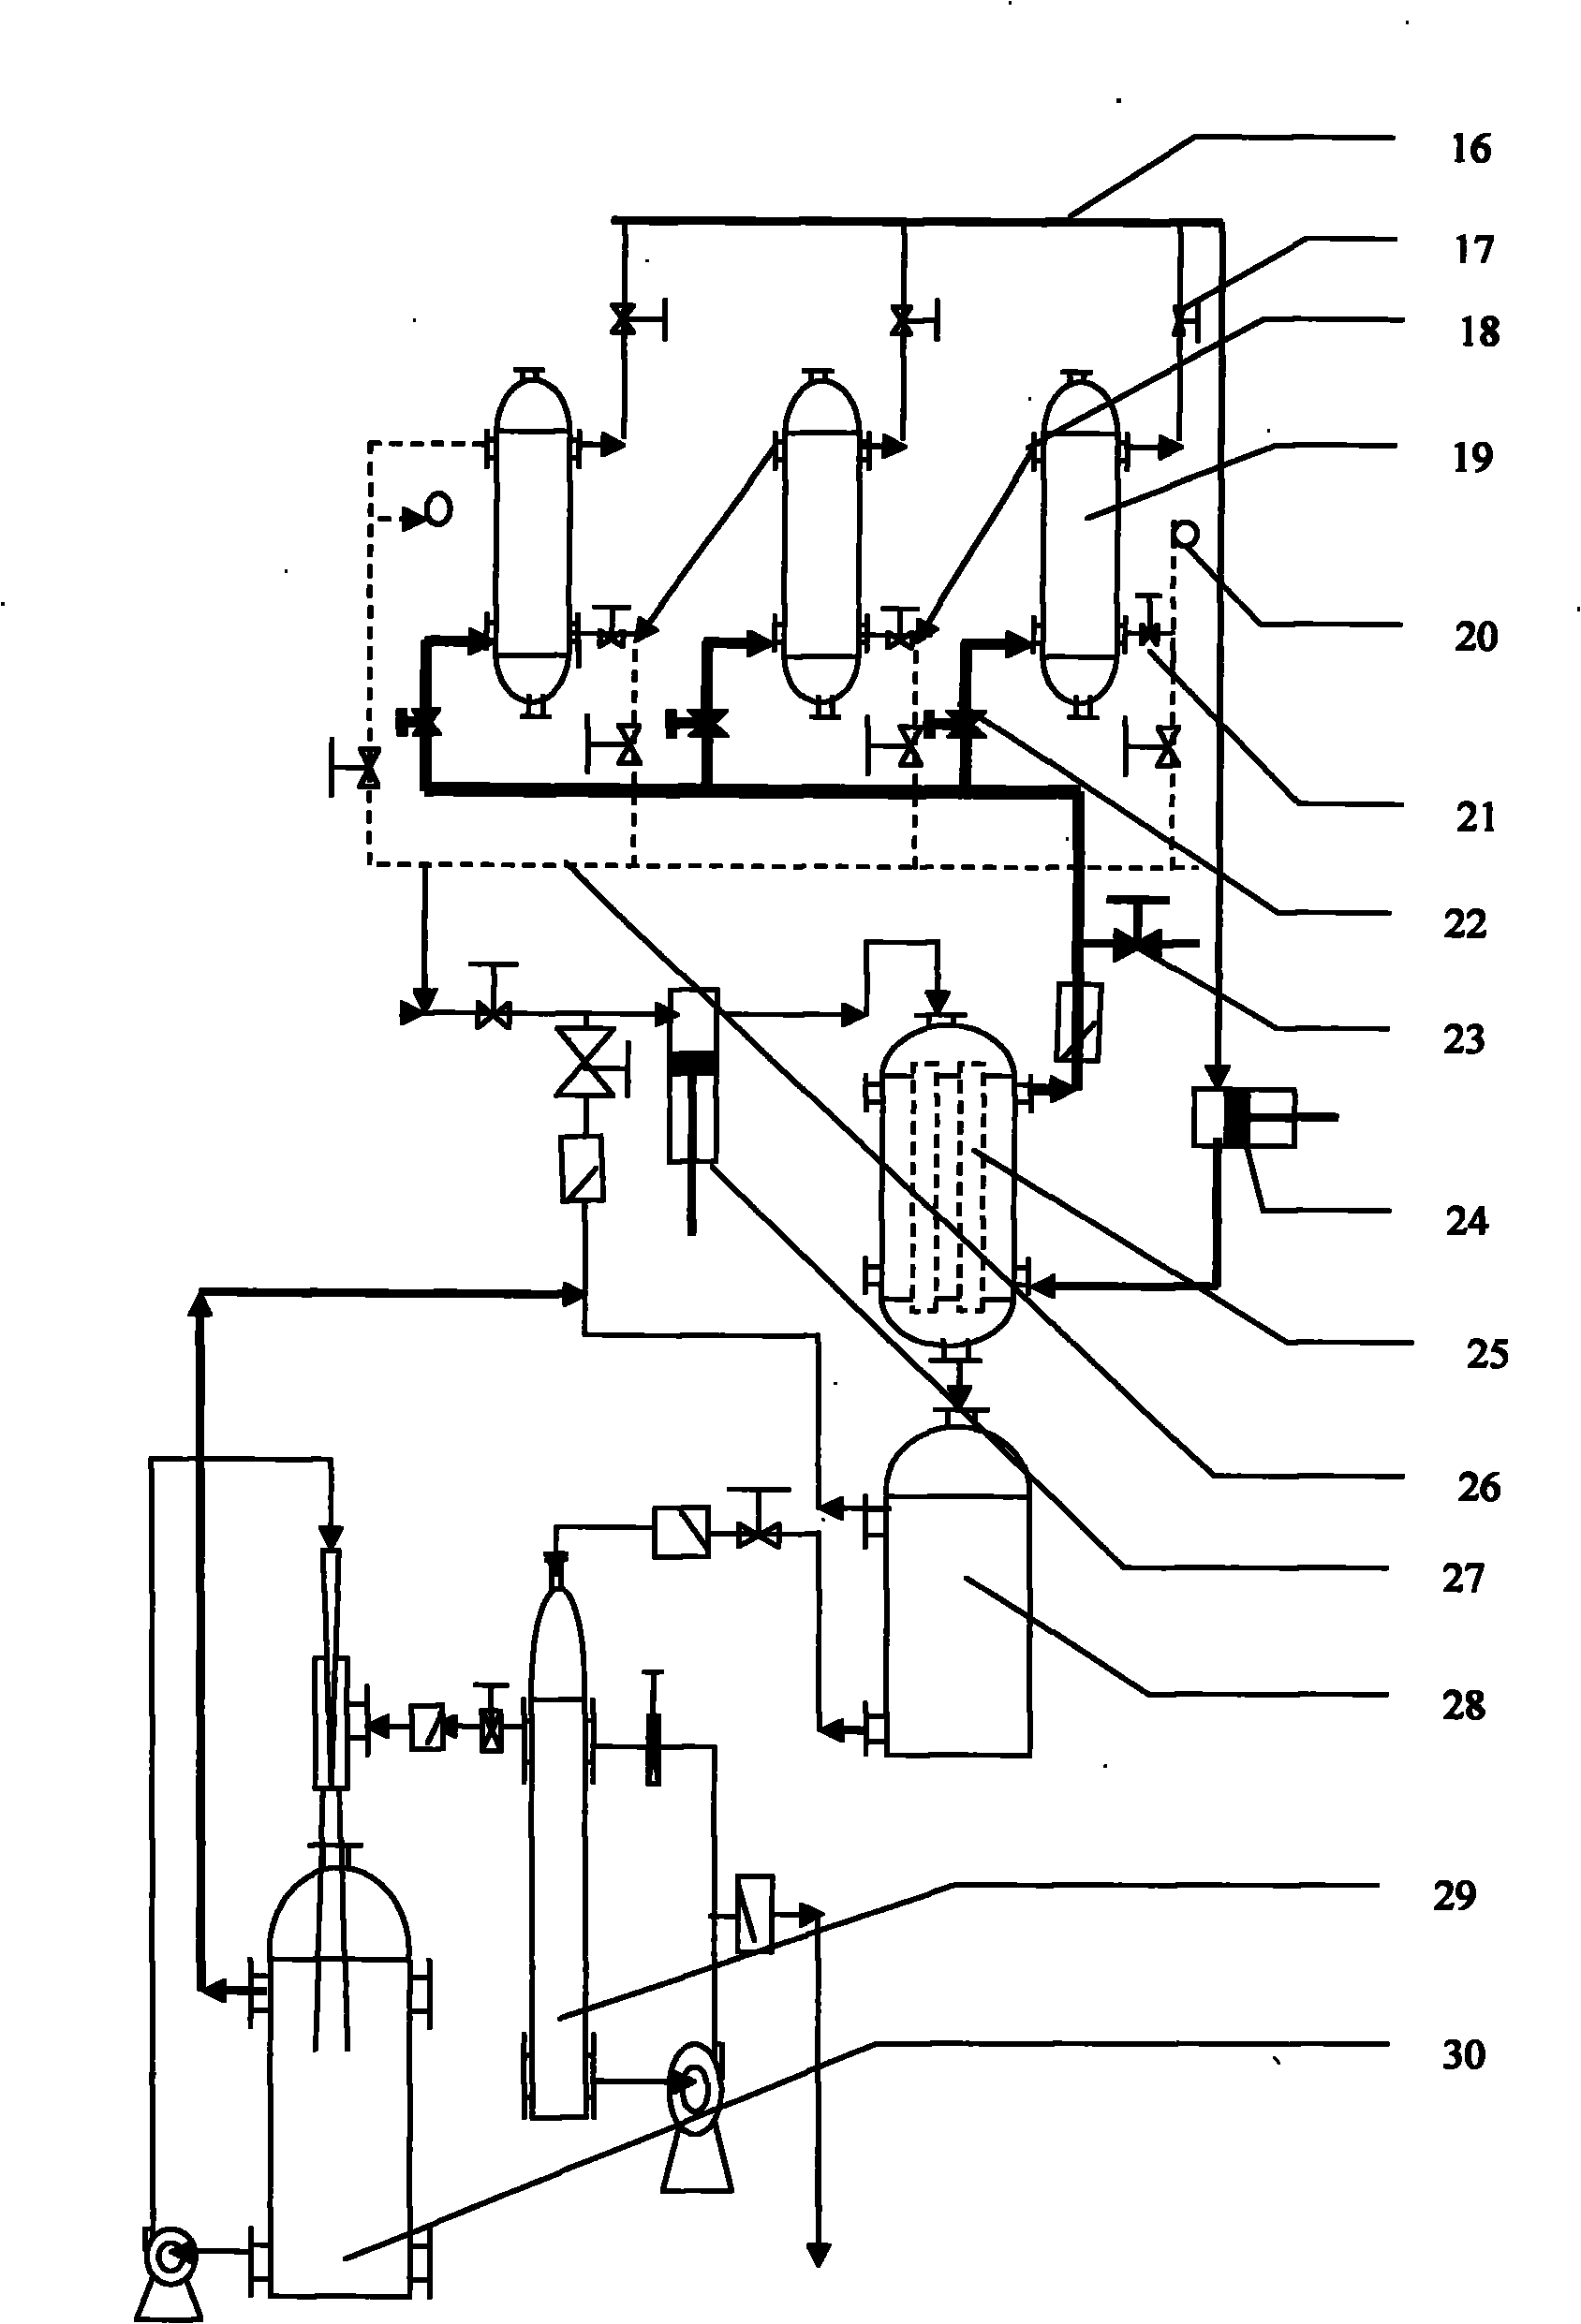 Method for drying materials by utilizing superheated steam